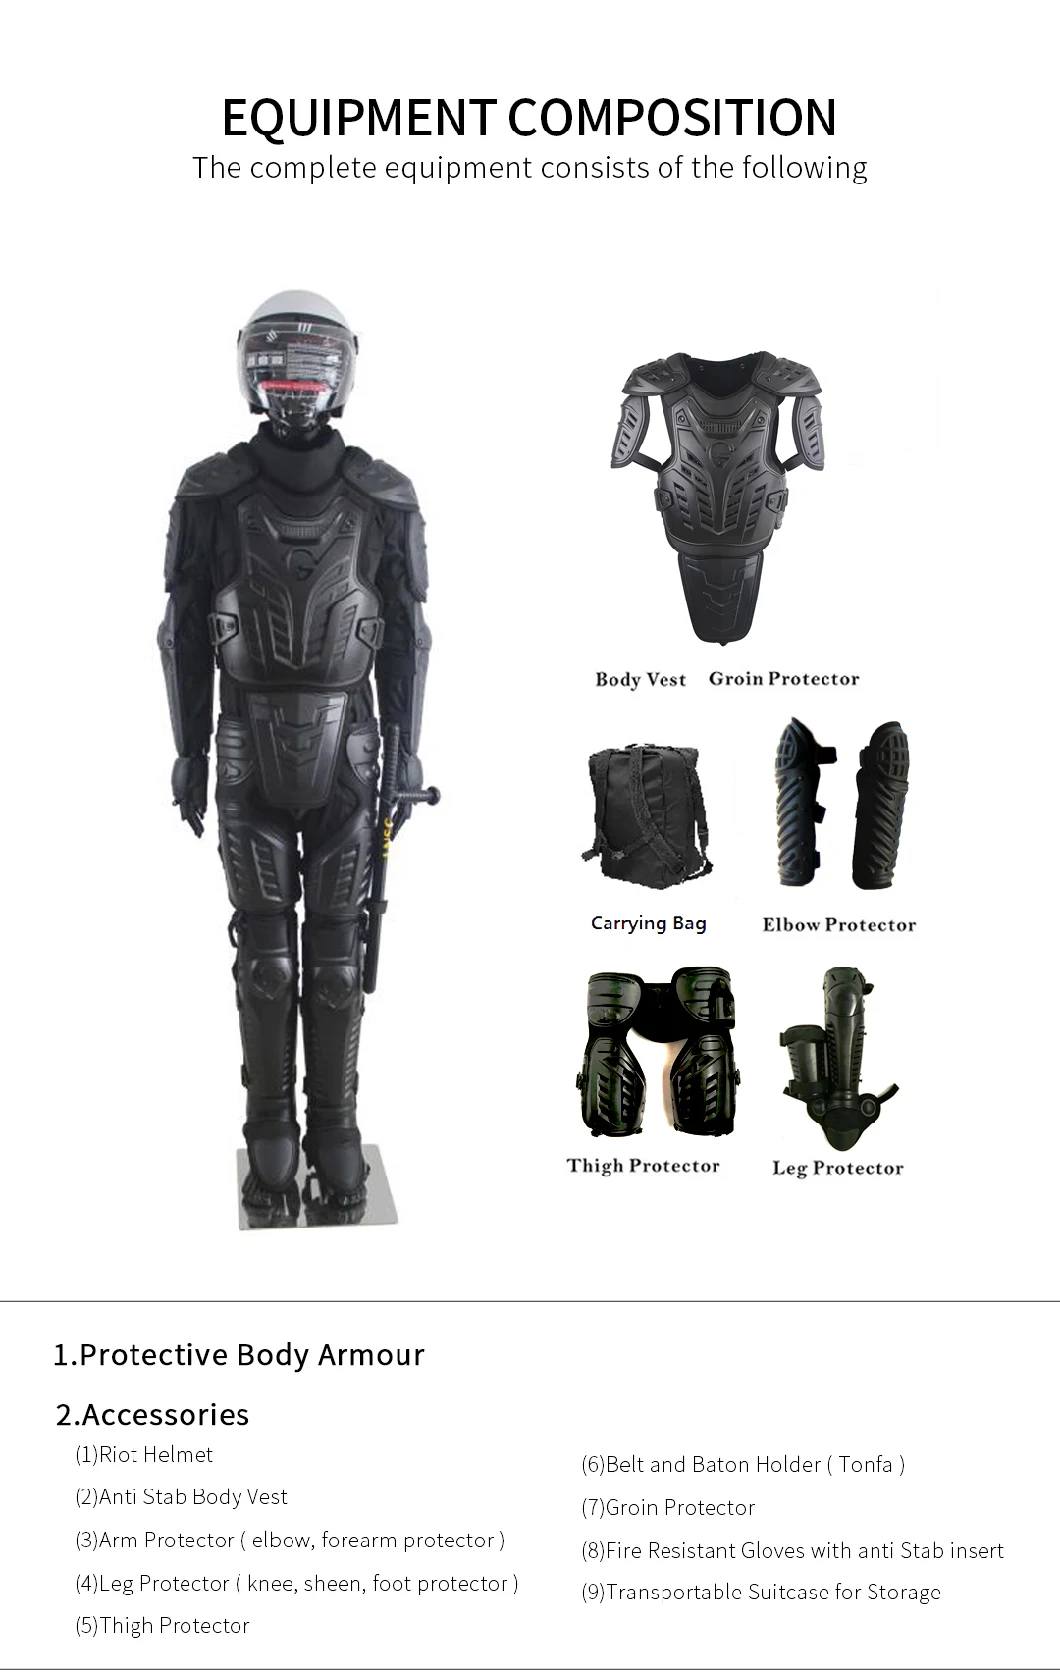 Police Anti Riot Suit/Anti Riot Gear for Body Protection